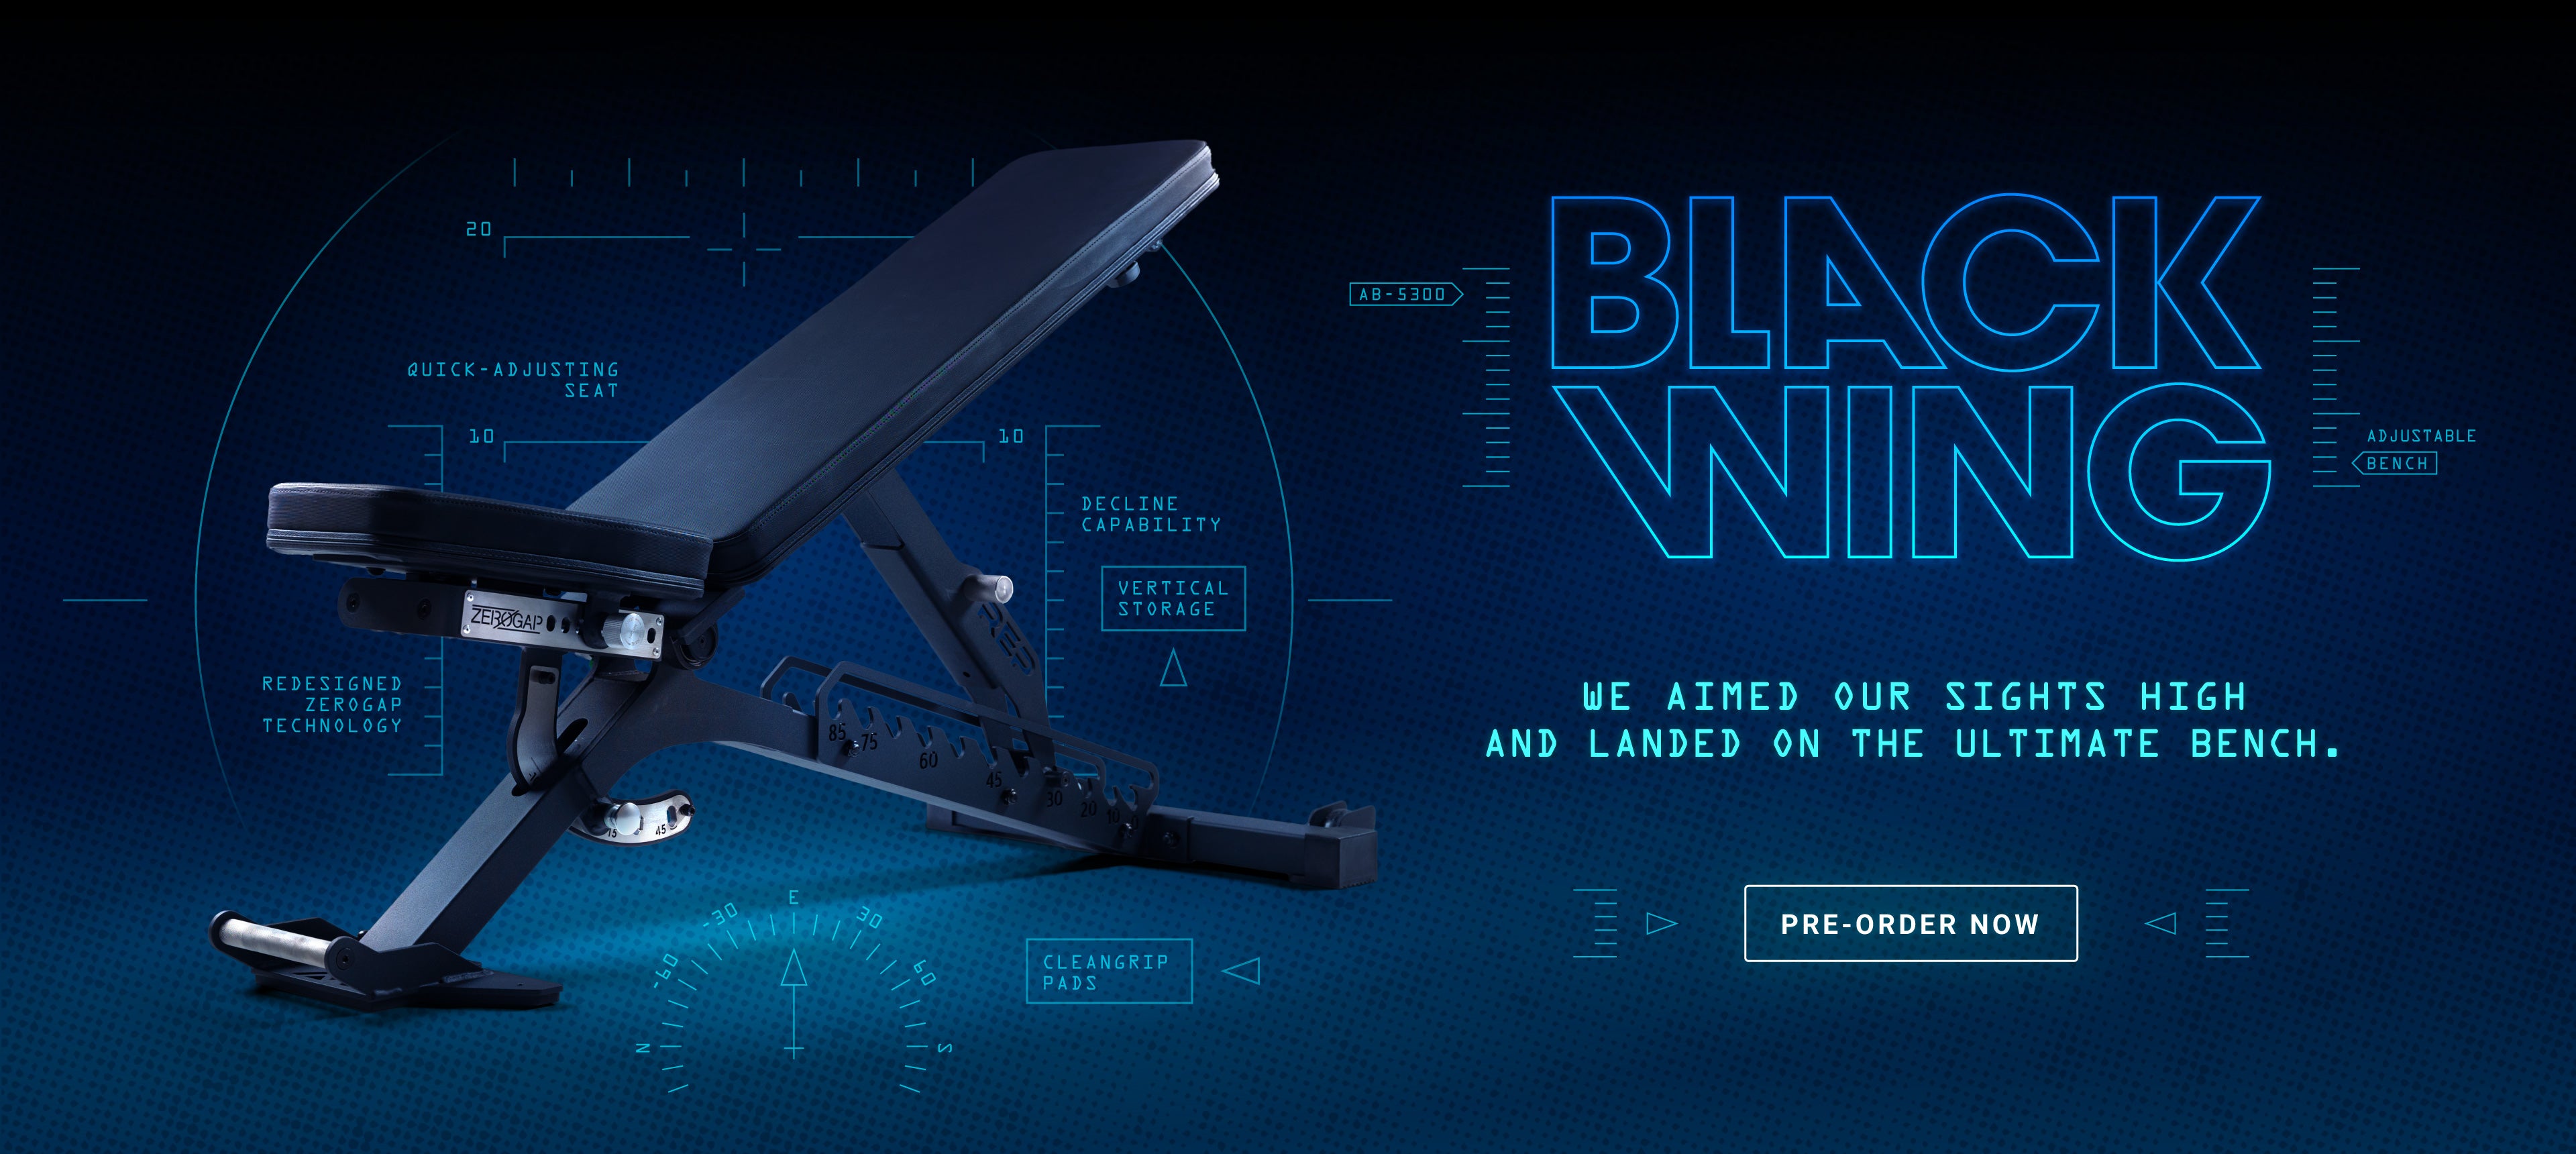 BlackWing. We aimed our sights high and landed on the ultimate bench. Pre-order now. 